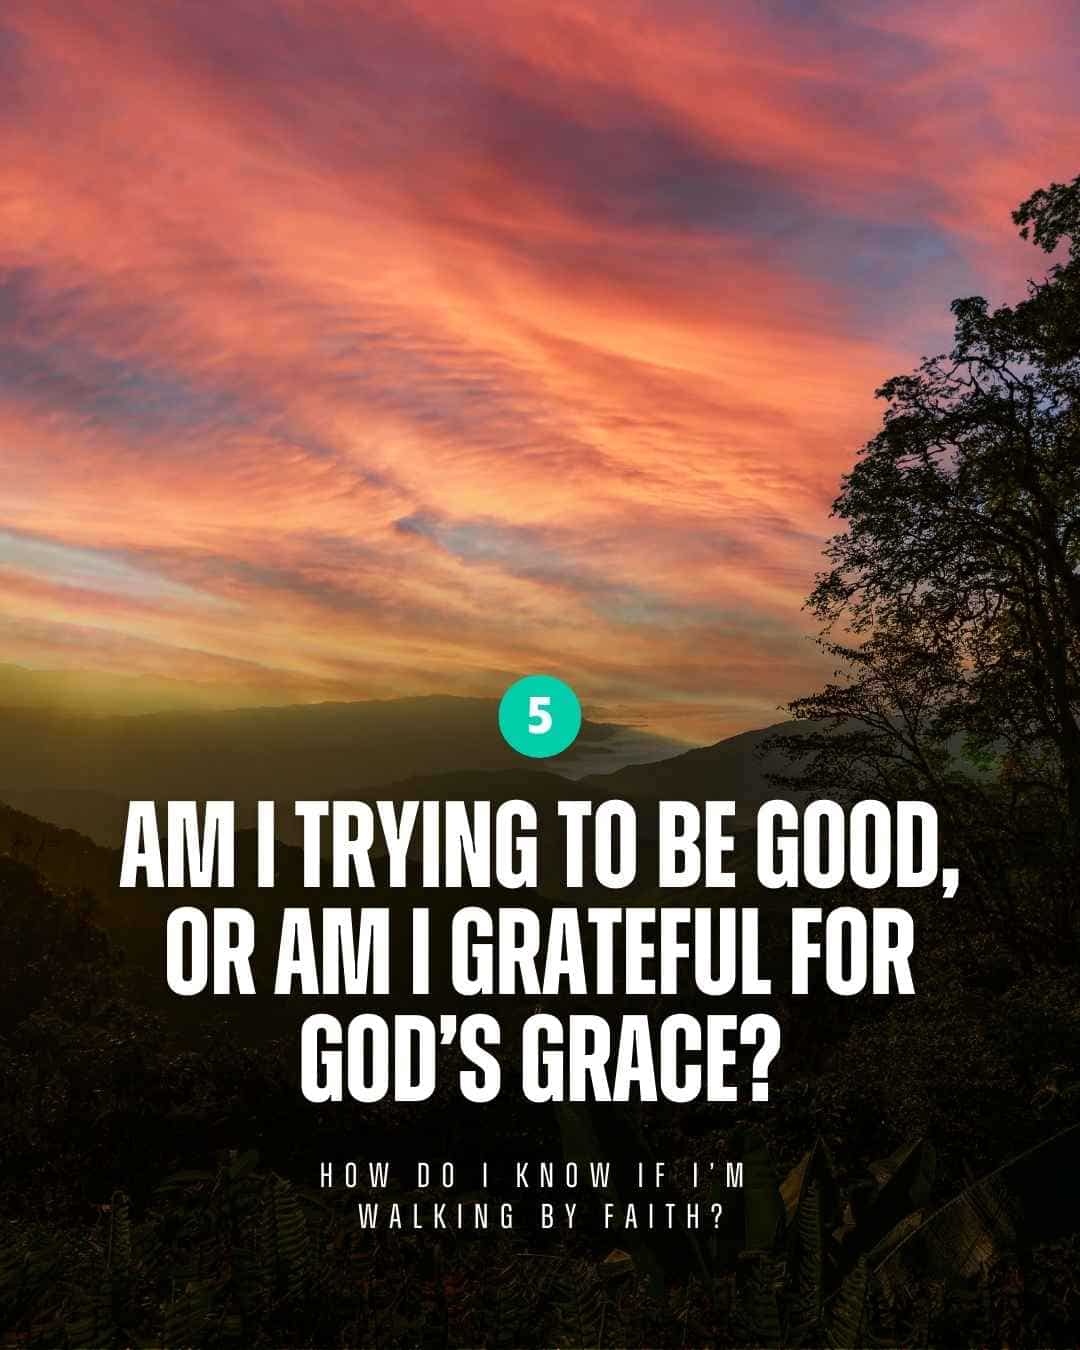 Walk by faith - Am I trying to be good, or am I grateful for God’s grace?